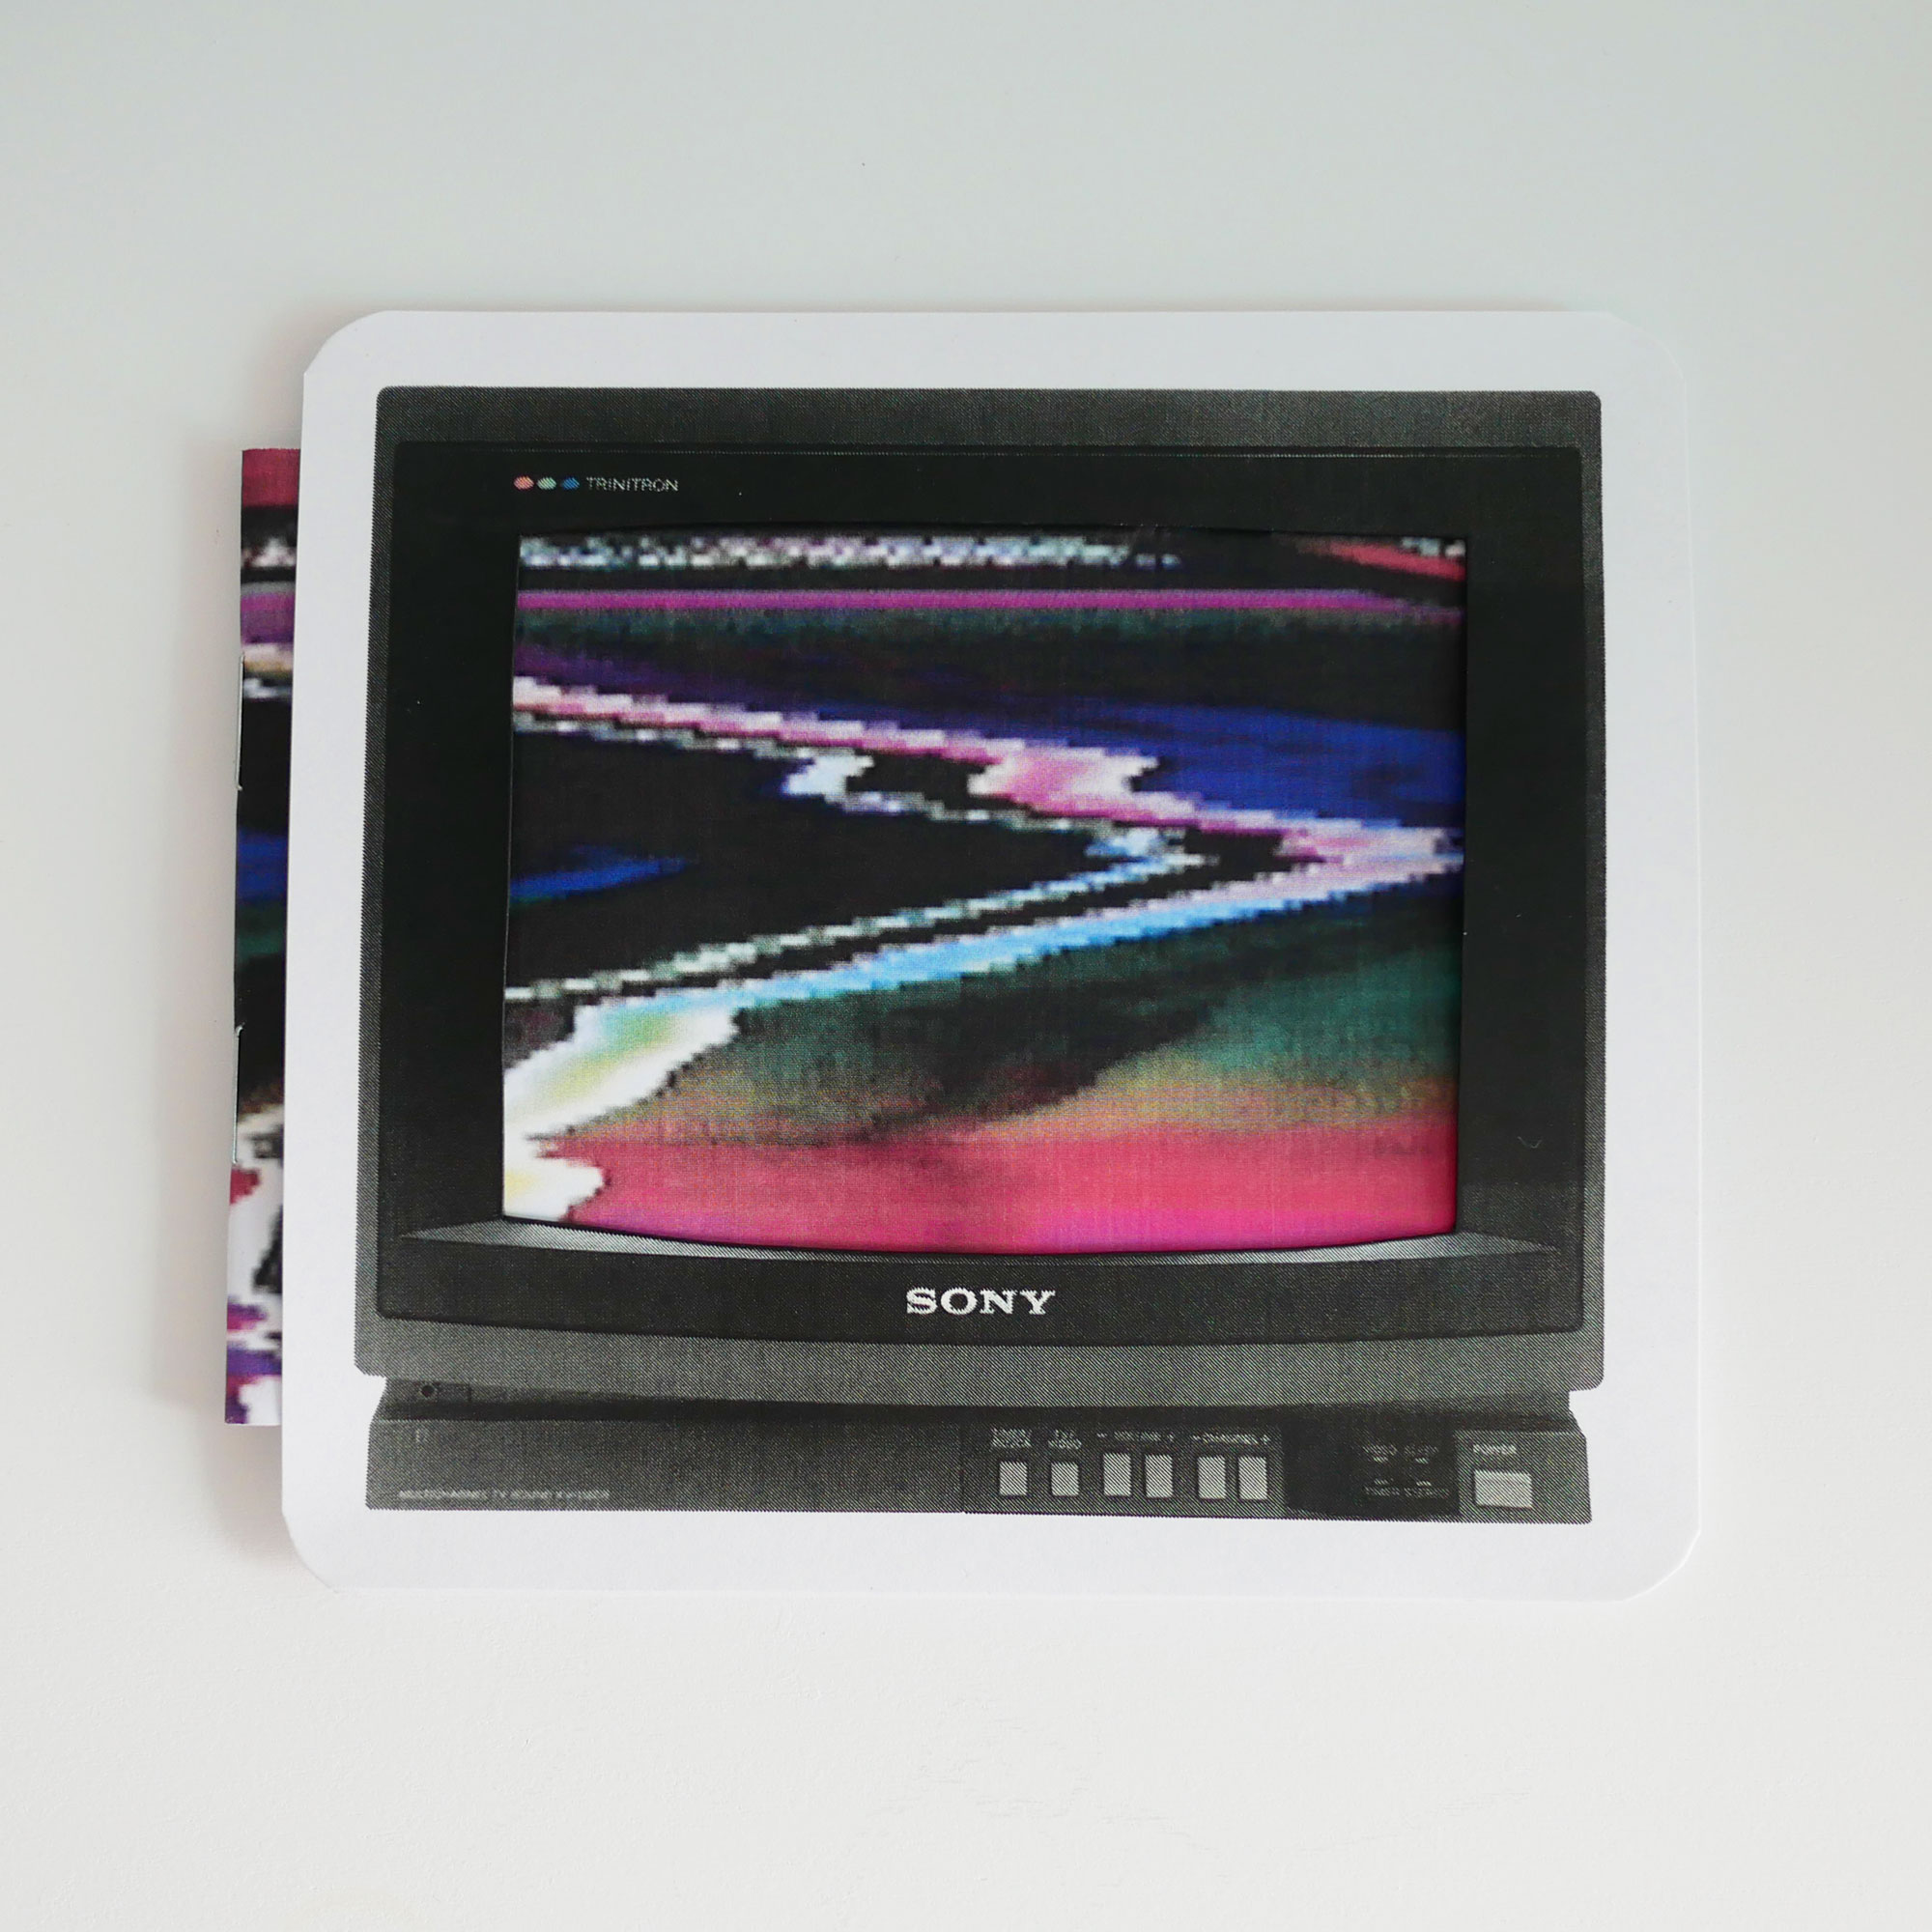 A zine in a TV shaped slipcover with the screen cut out. The booklet cover depicting a scrambled TV image shows through